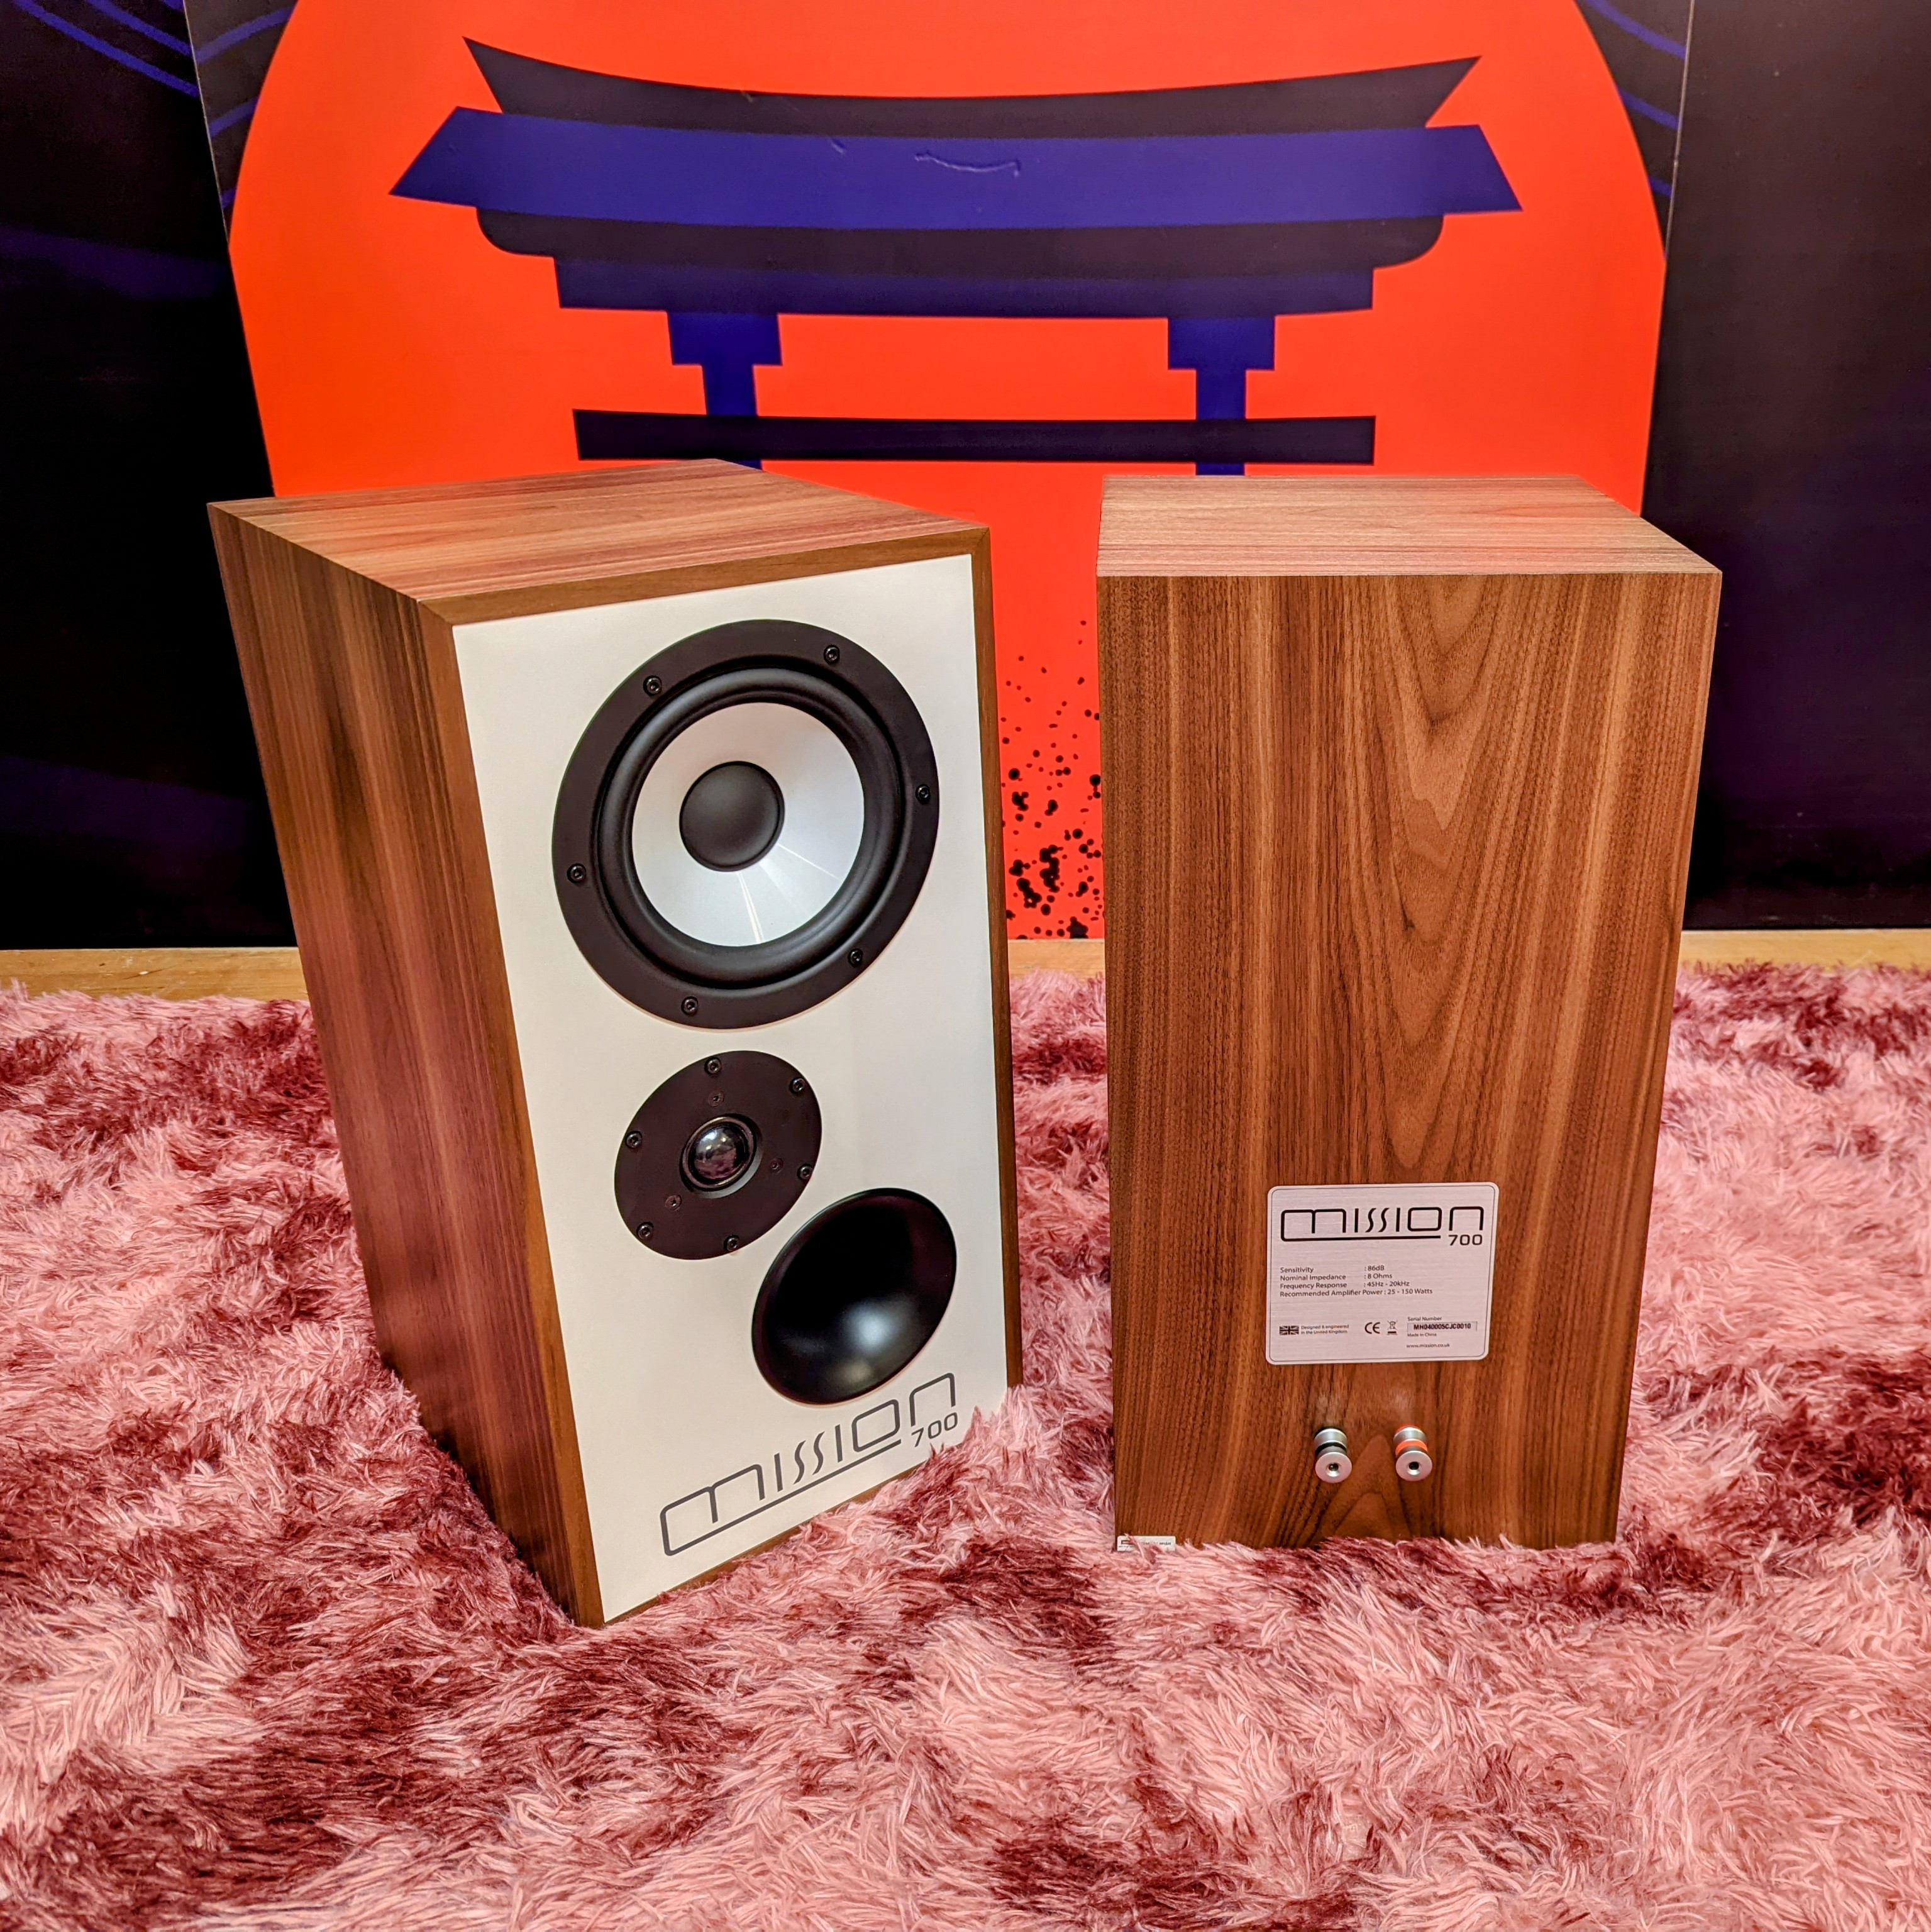 Mission 700 review: appealing, retro-inspired speakers | What Hi-Fi?